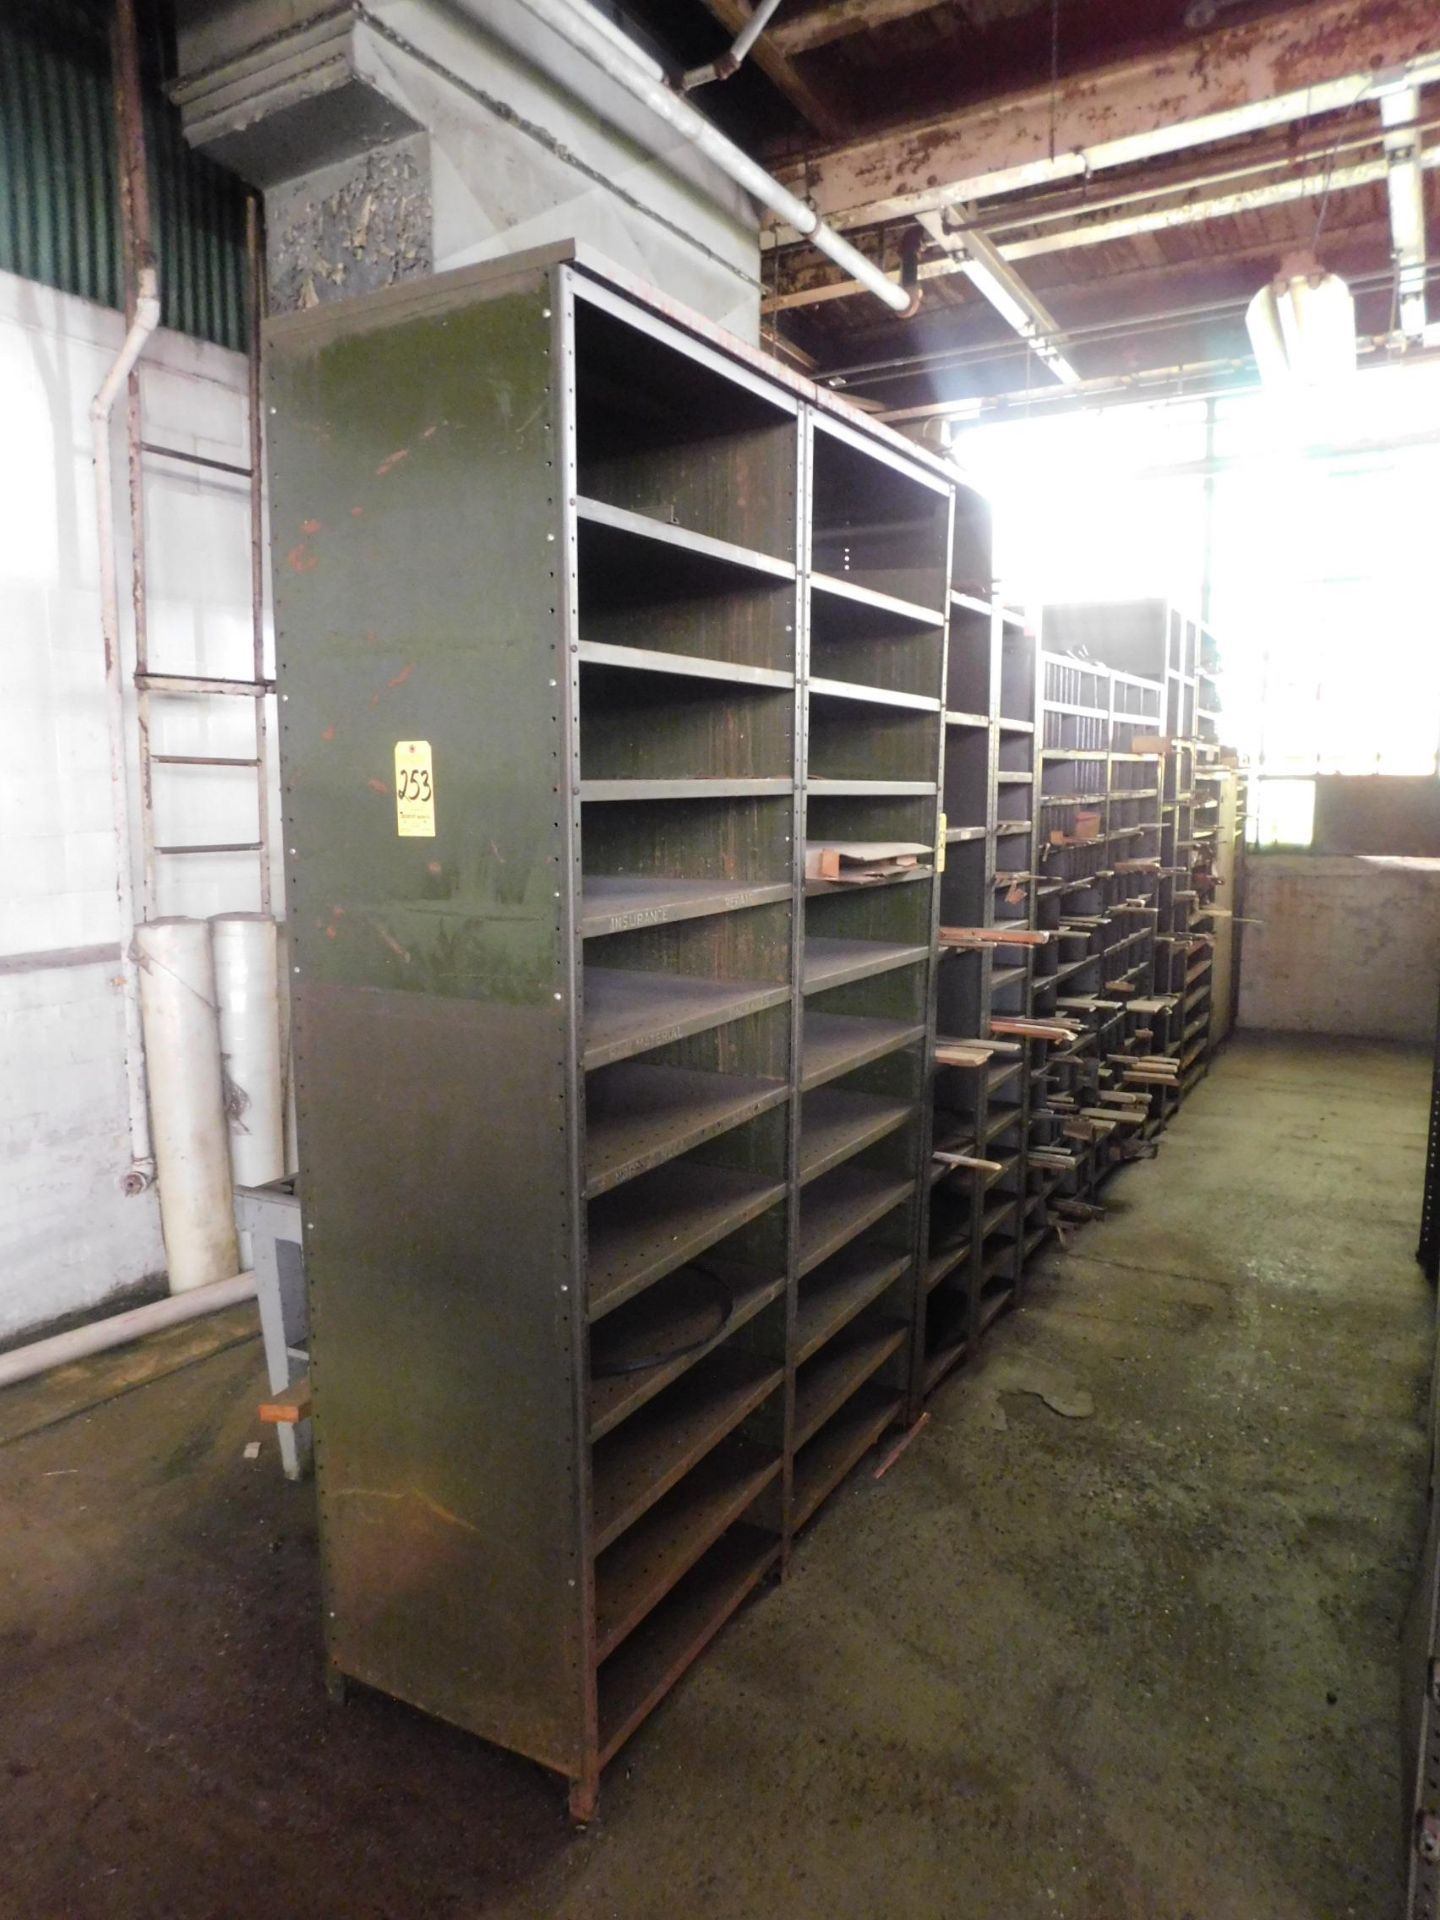 (10) Sections of Metal Shelving, No Contents